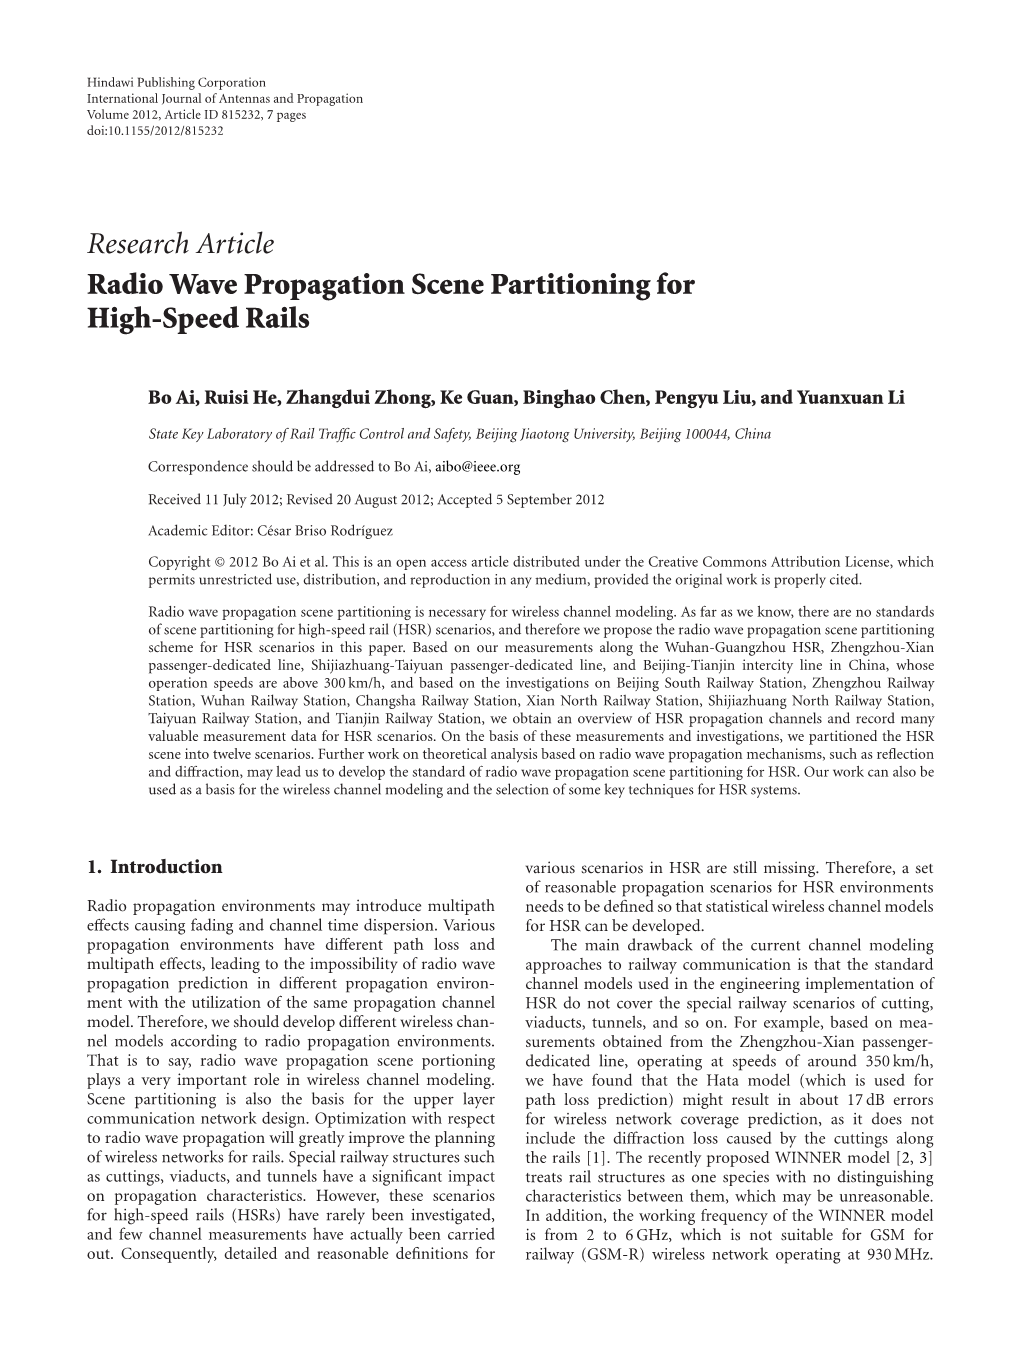 Radio Wave Propagation Scene Partitioning for High-Speed Rails